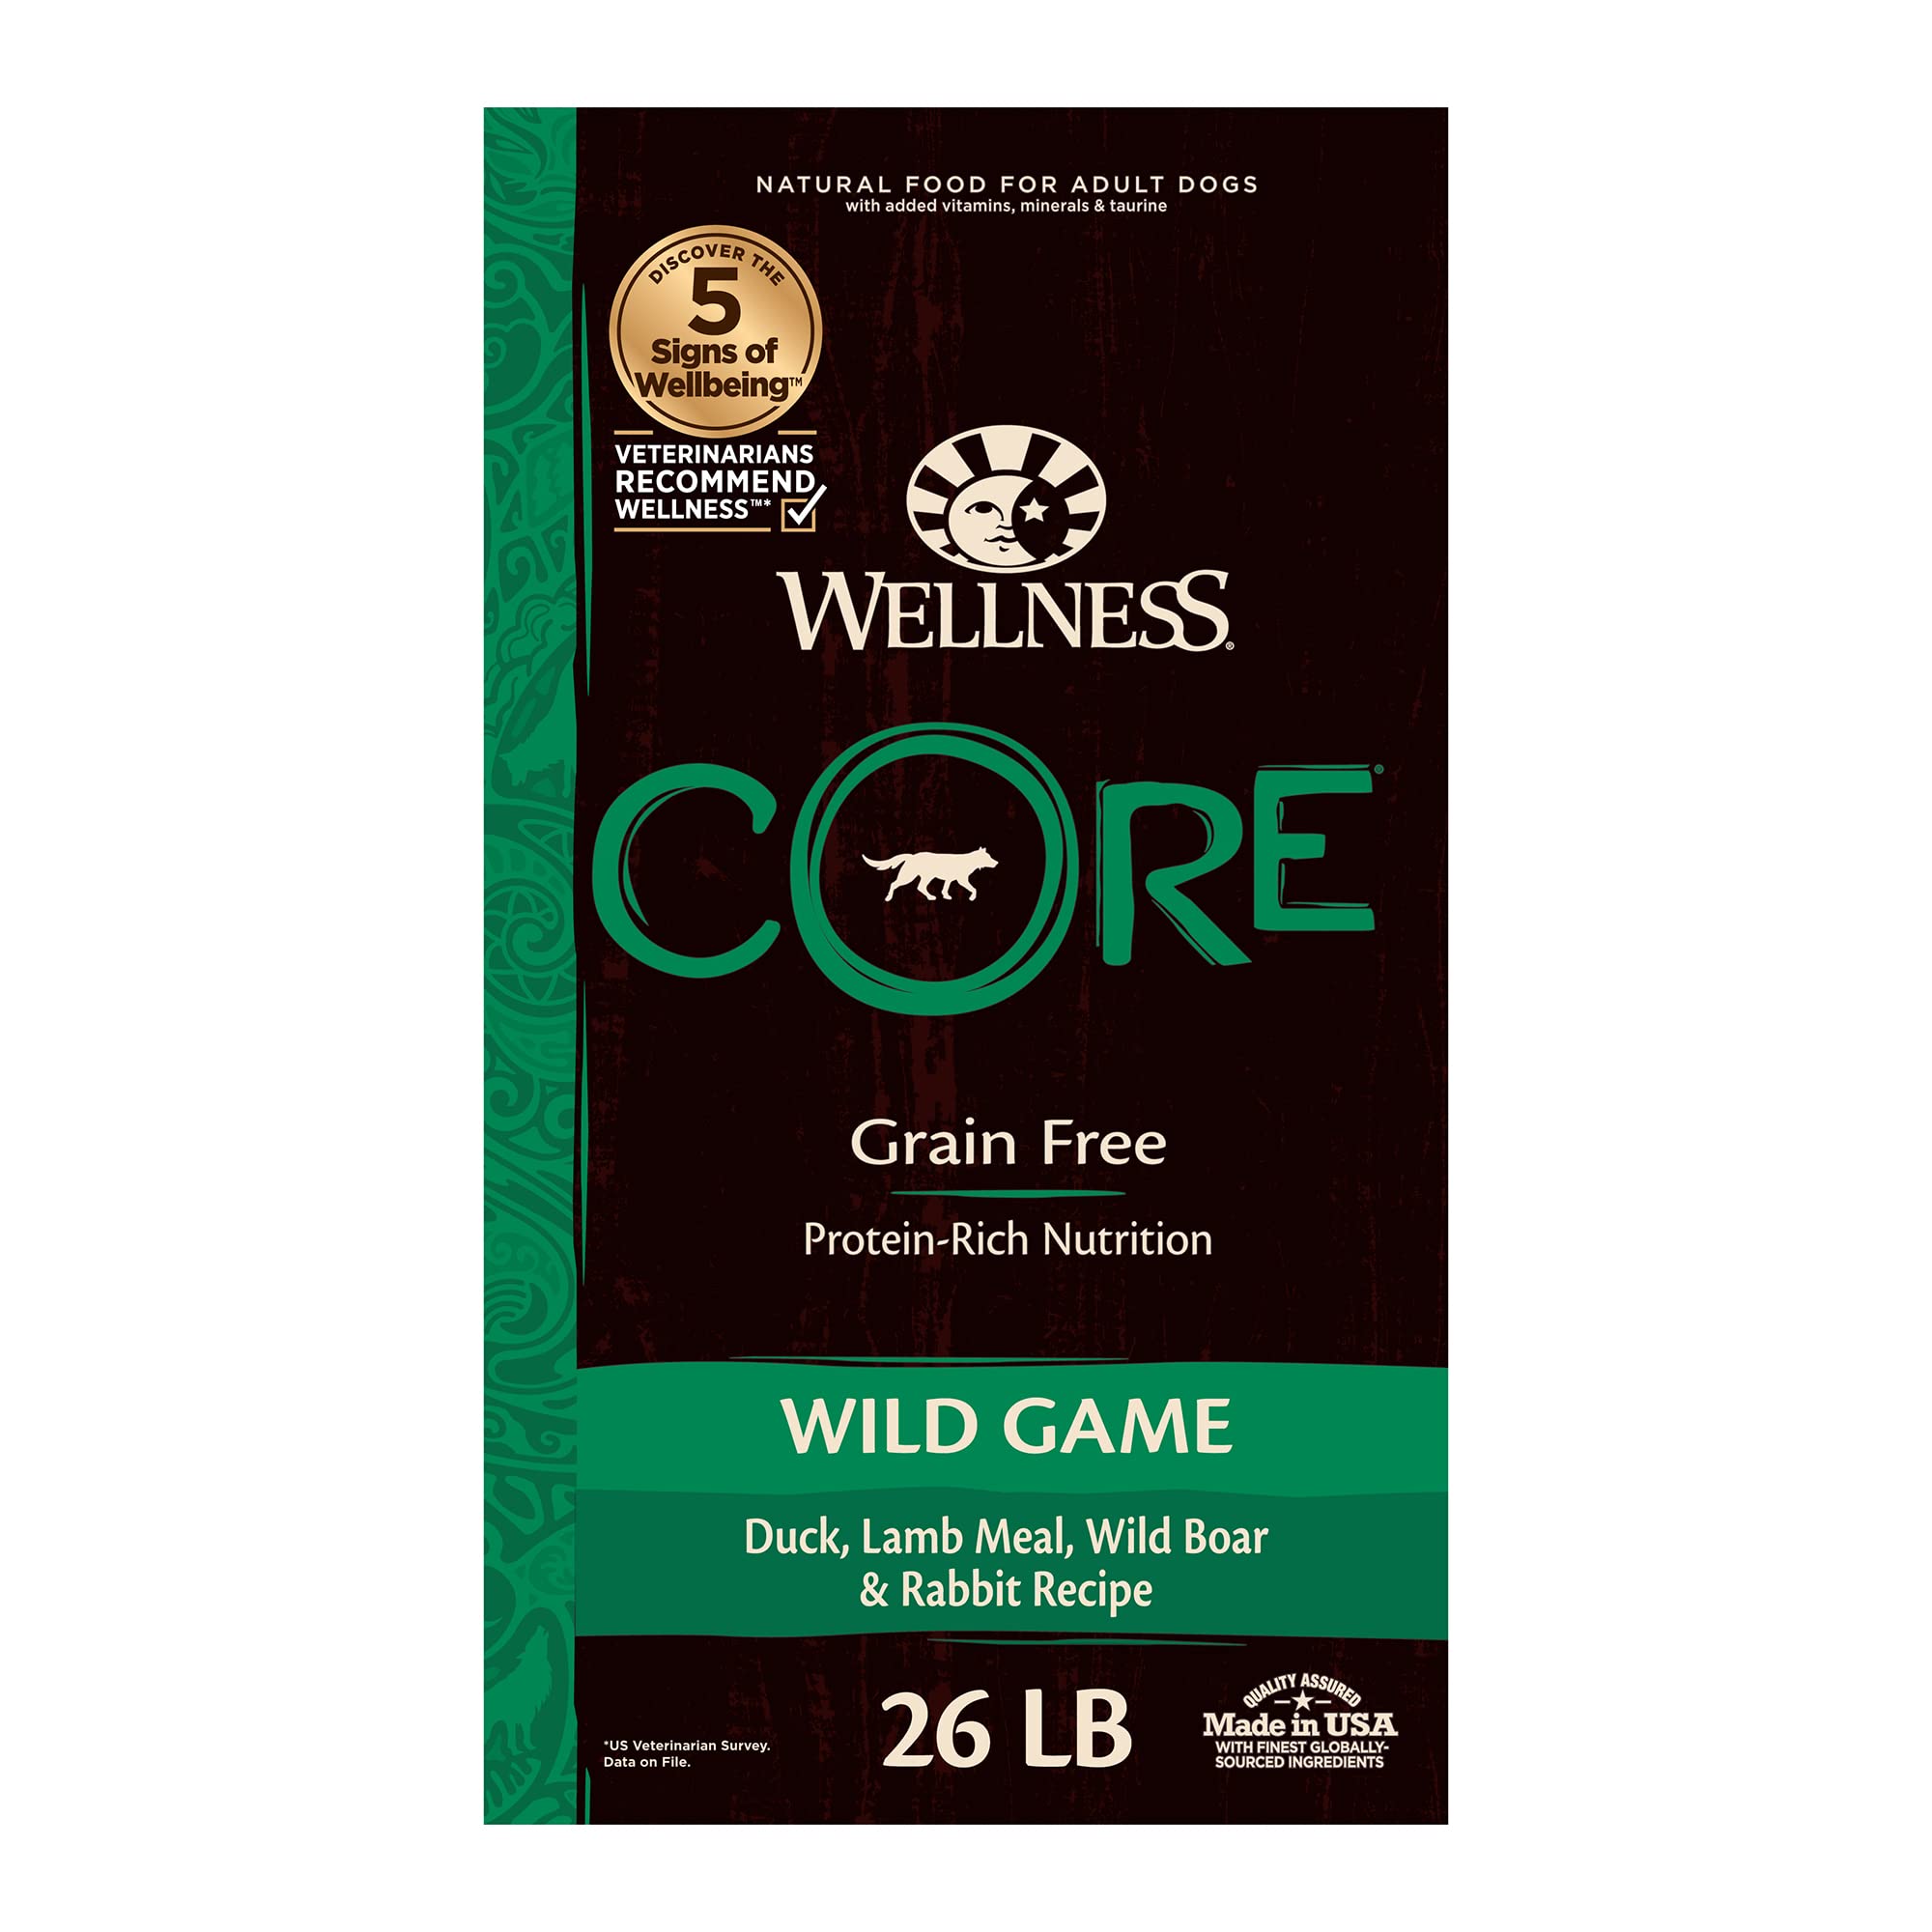 Wellness CORE Grain-Free High-Protein Dry Dog Food, Natural Ingredients, Made in USA with Real Meat, All Breeds, For Adult Dogs (Wild Game Duck, Lamb Meal, Boar & Rabbit, 26-Pound Bag)